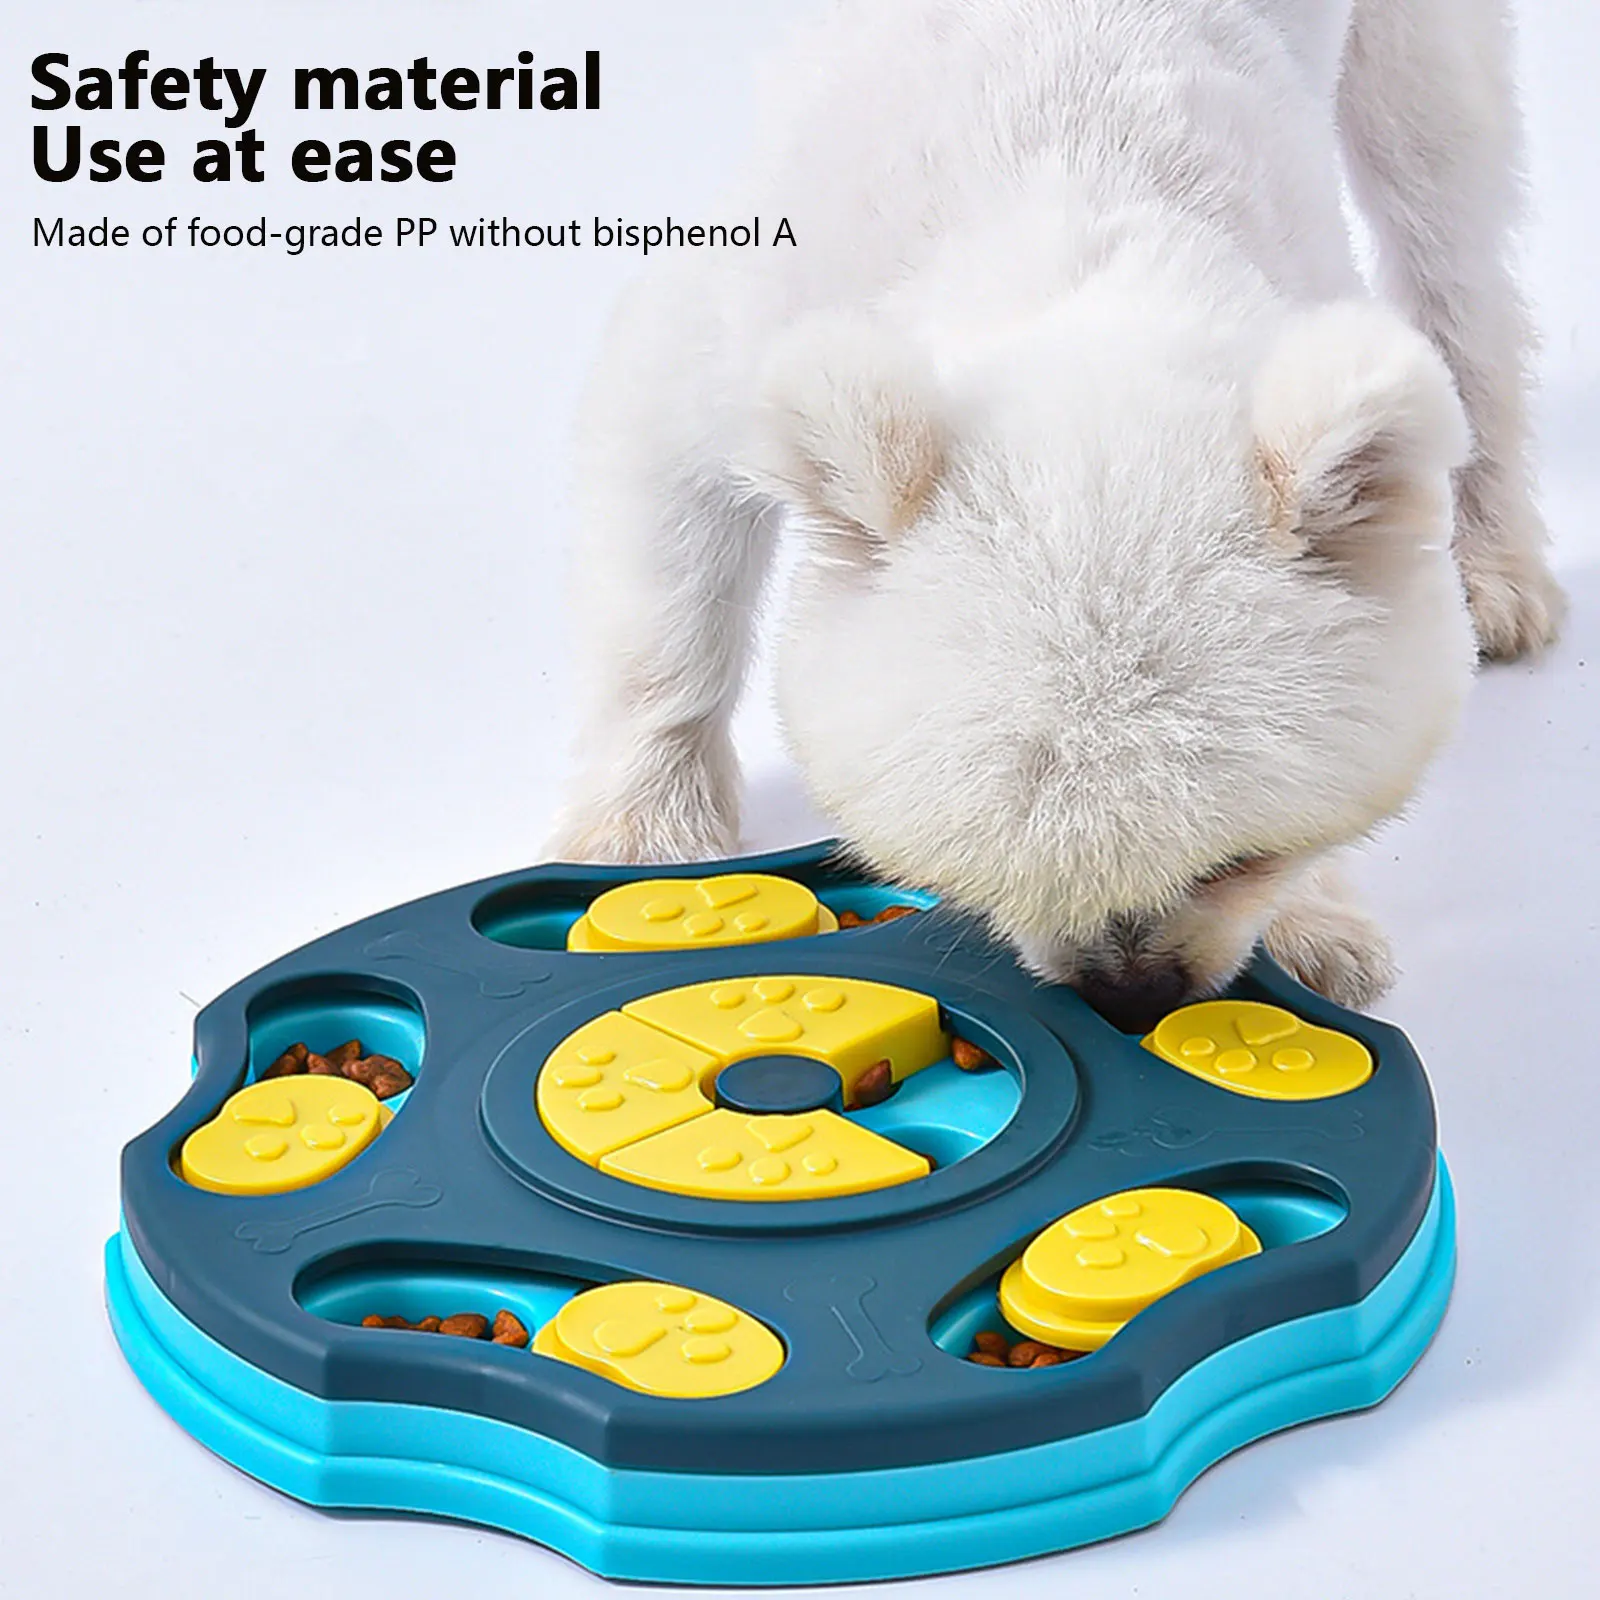 

Dog Puzzle Toys Slow Feeder Increase IQ Interactive Turntable Toy Food Dispenser Slowly Eating Bowl Pet Cat Dogs Training Game